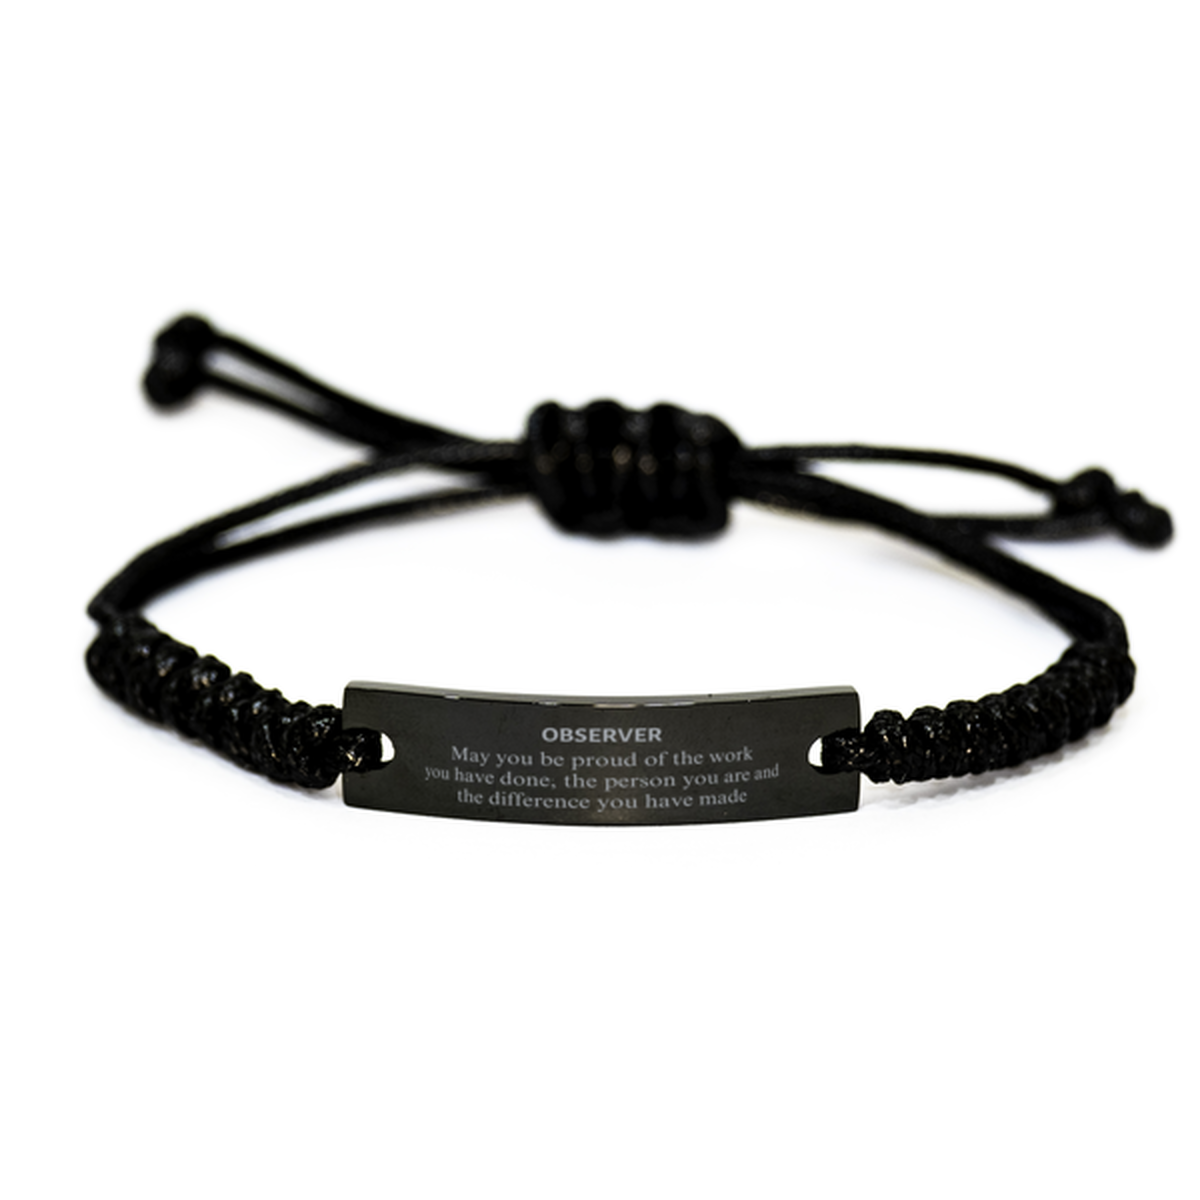 Observer May you be proud of the work you have done, Retirement Observer Black Rope Bracelet for Colleague Appreciation Gifts Amazing for Observer